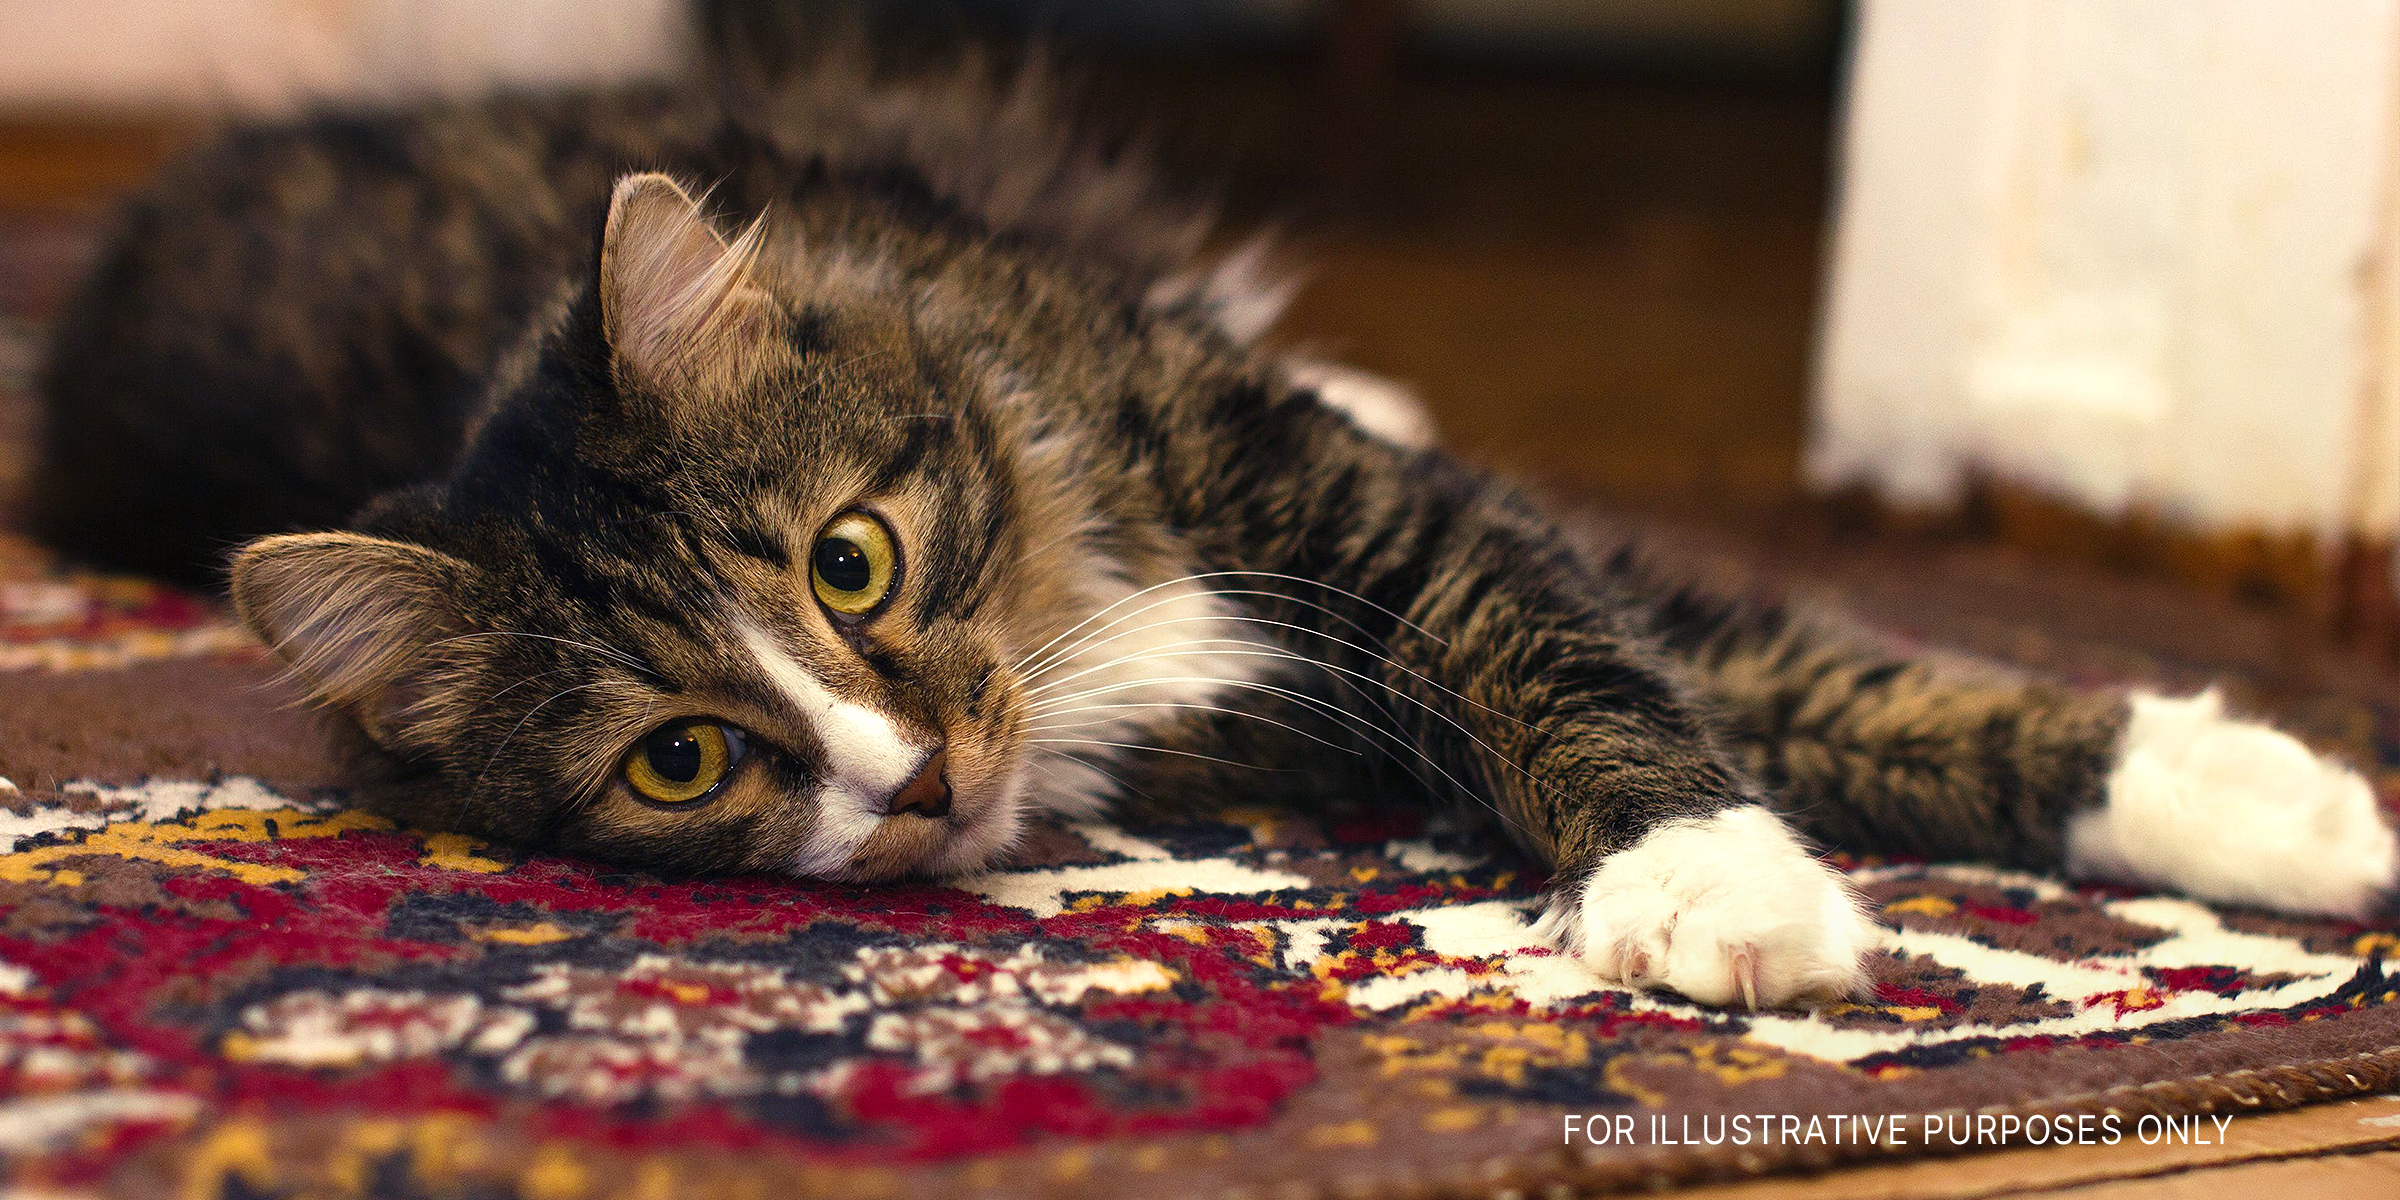 A cat resting on the carpet | Source: Pexels/lord_photon